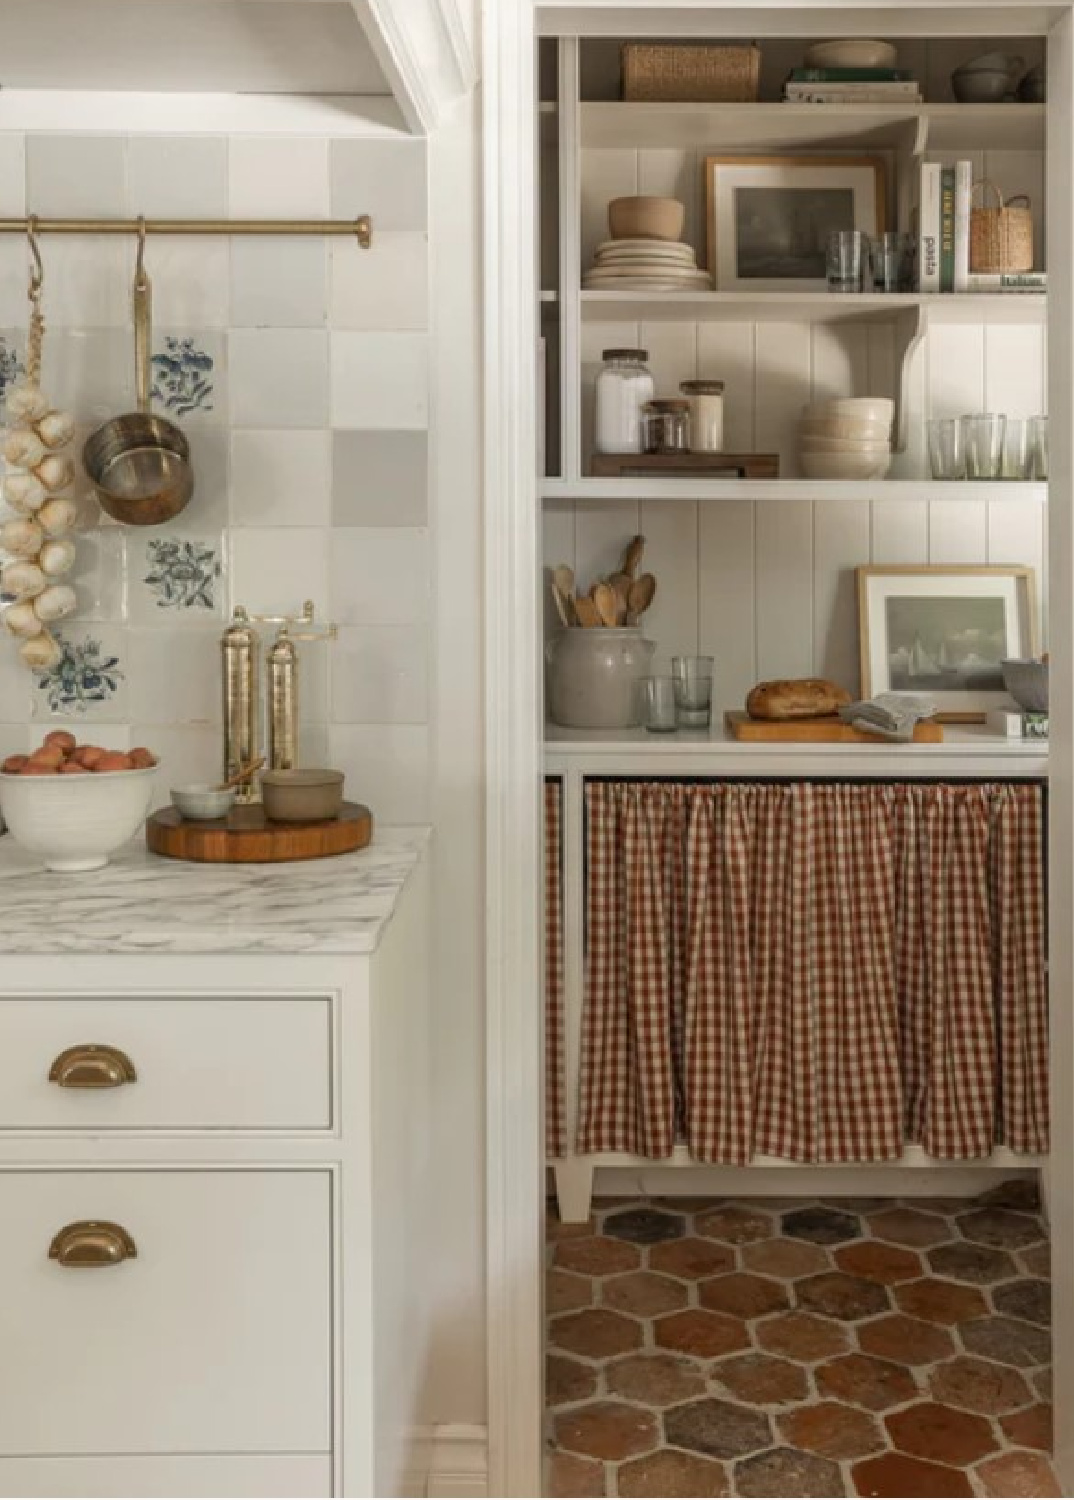 Amber Lewis (Shoppe Amber Interiors) designed fall interior with laid back, luxe, livable, California inspired modern rustic charm. #amberlewis #modernrusticinteriors #californiacool